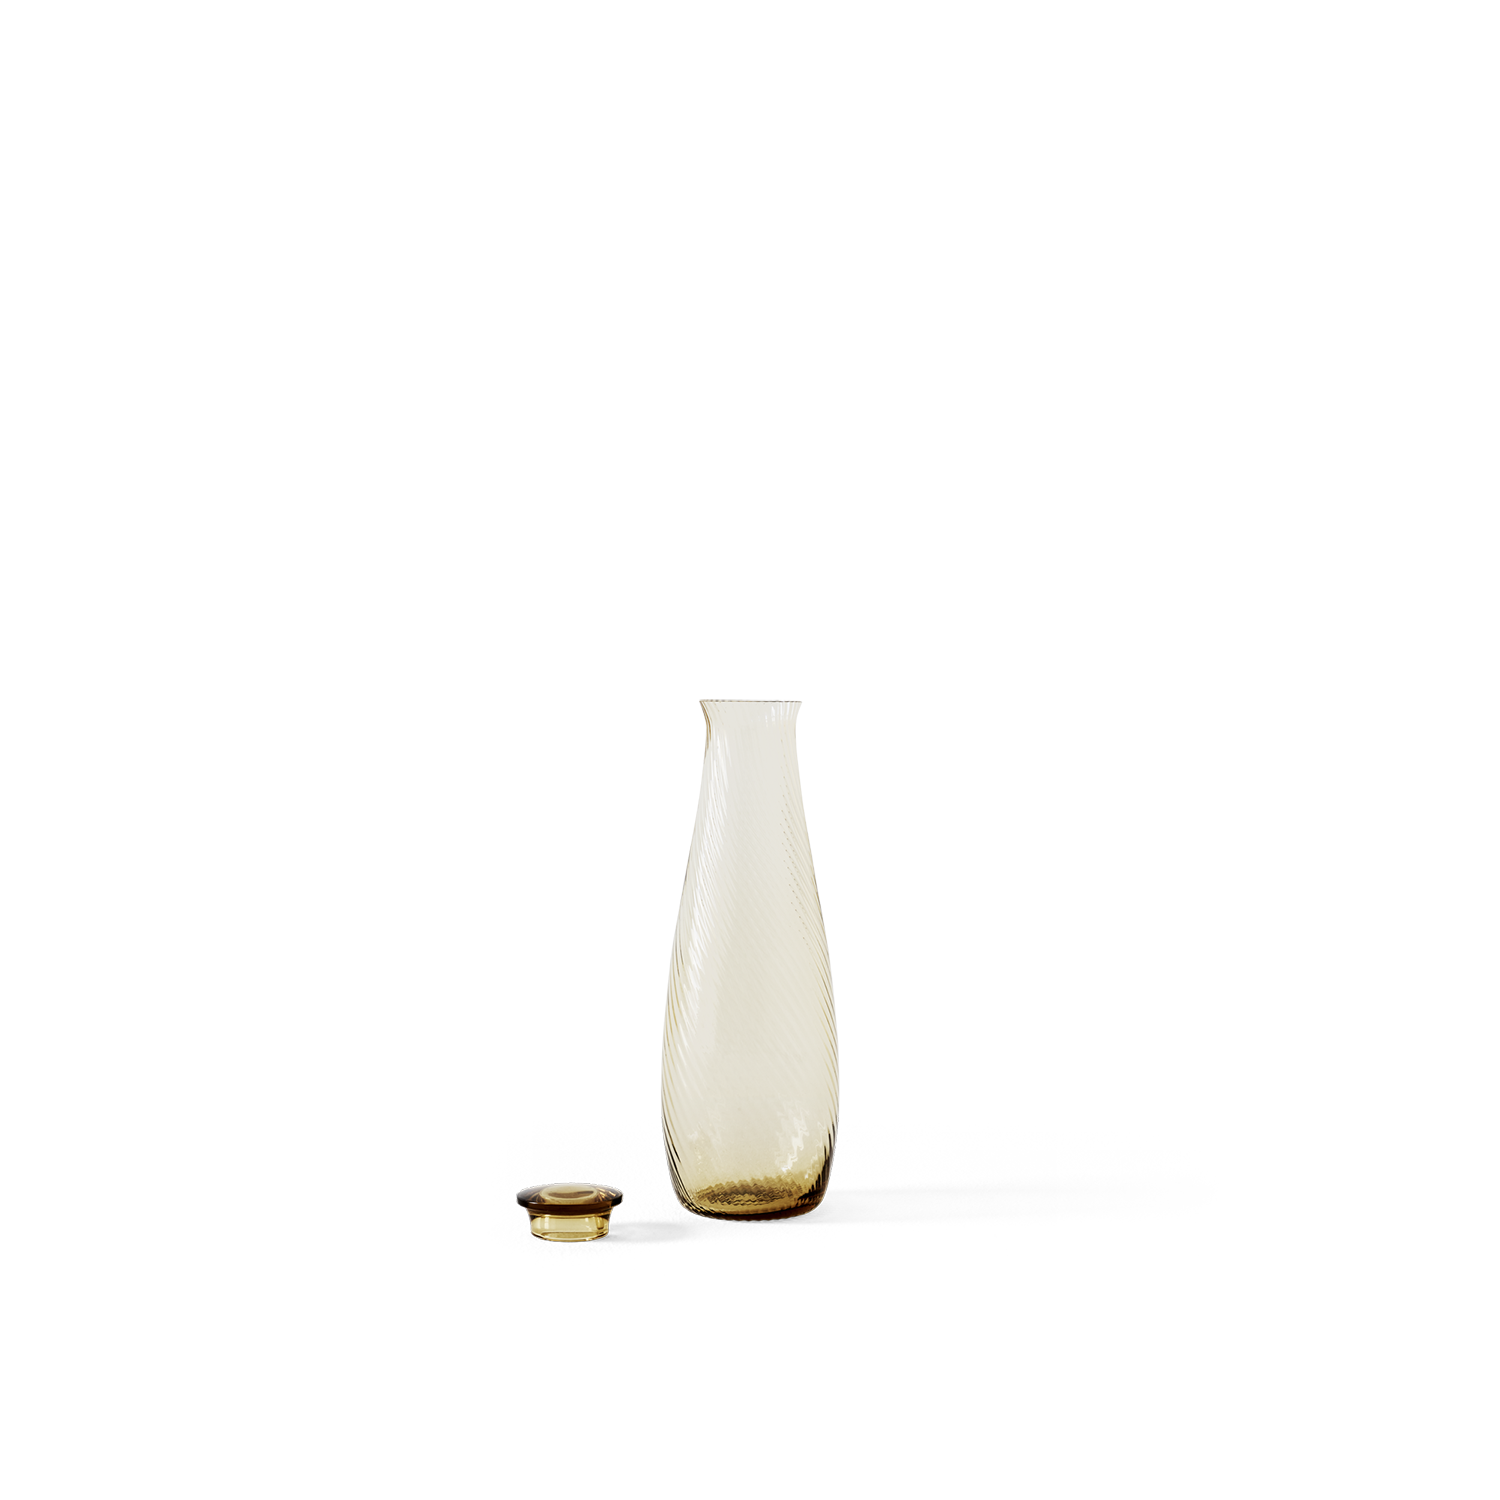 &Tradition SC62 Collect Carafe - 800ml